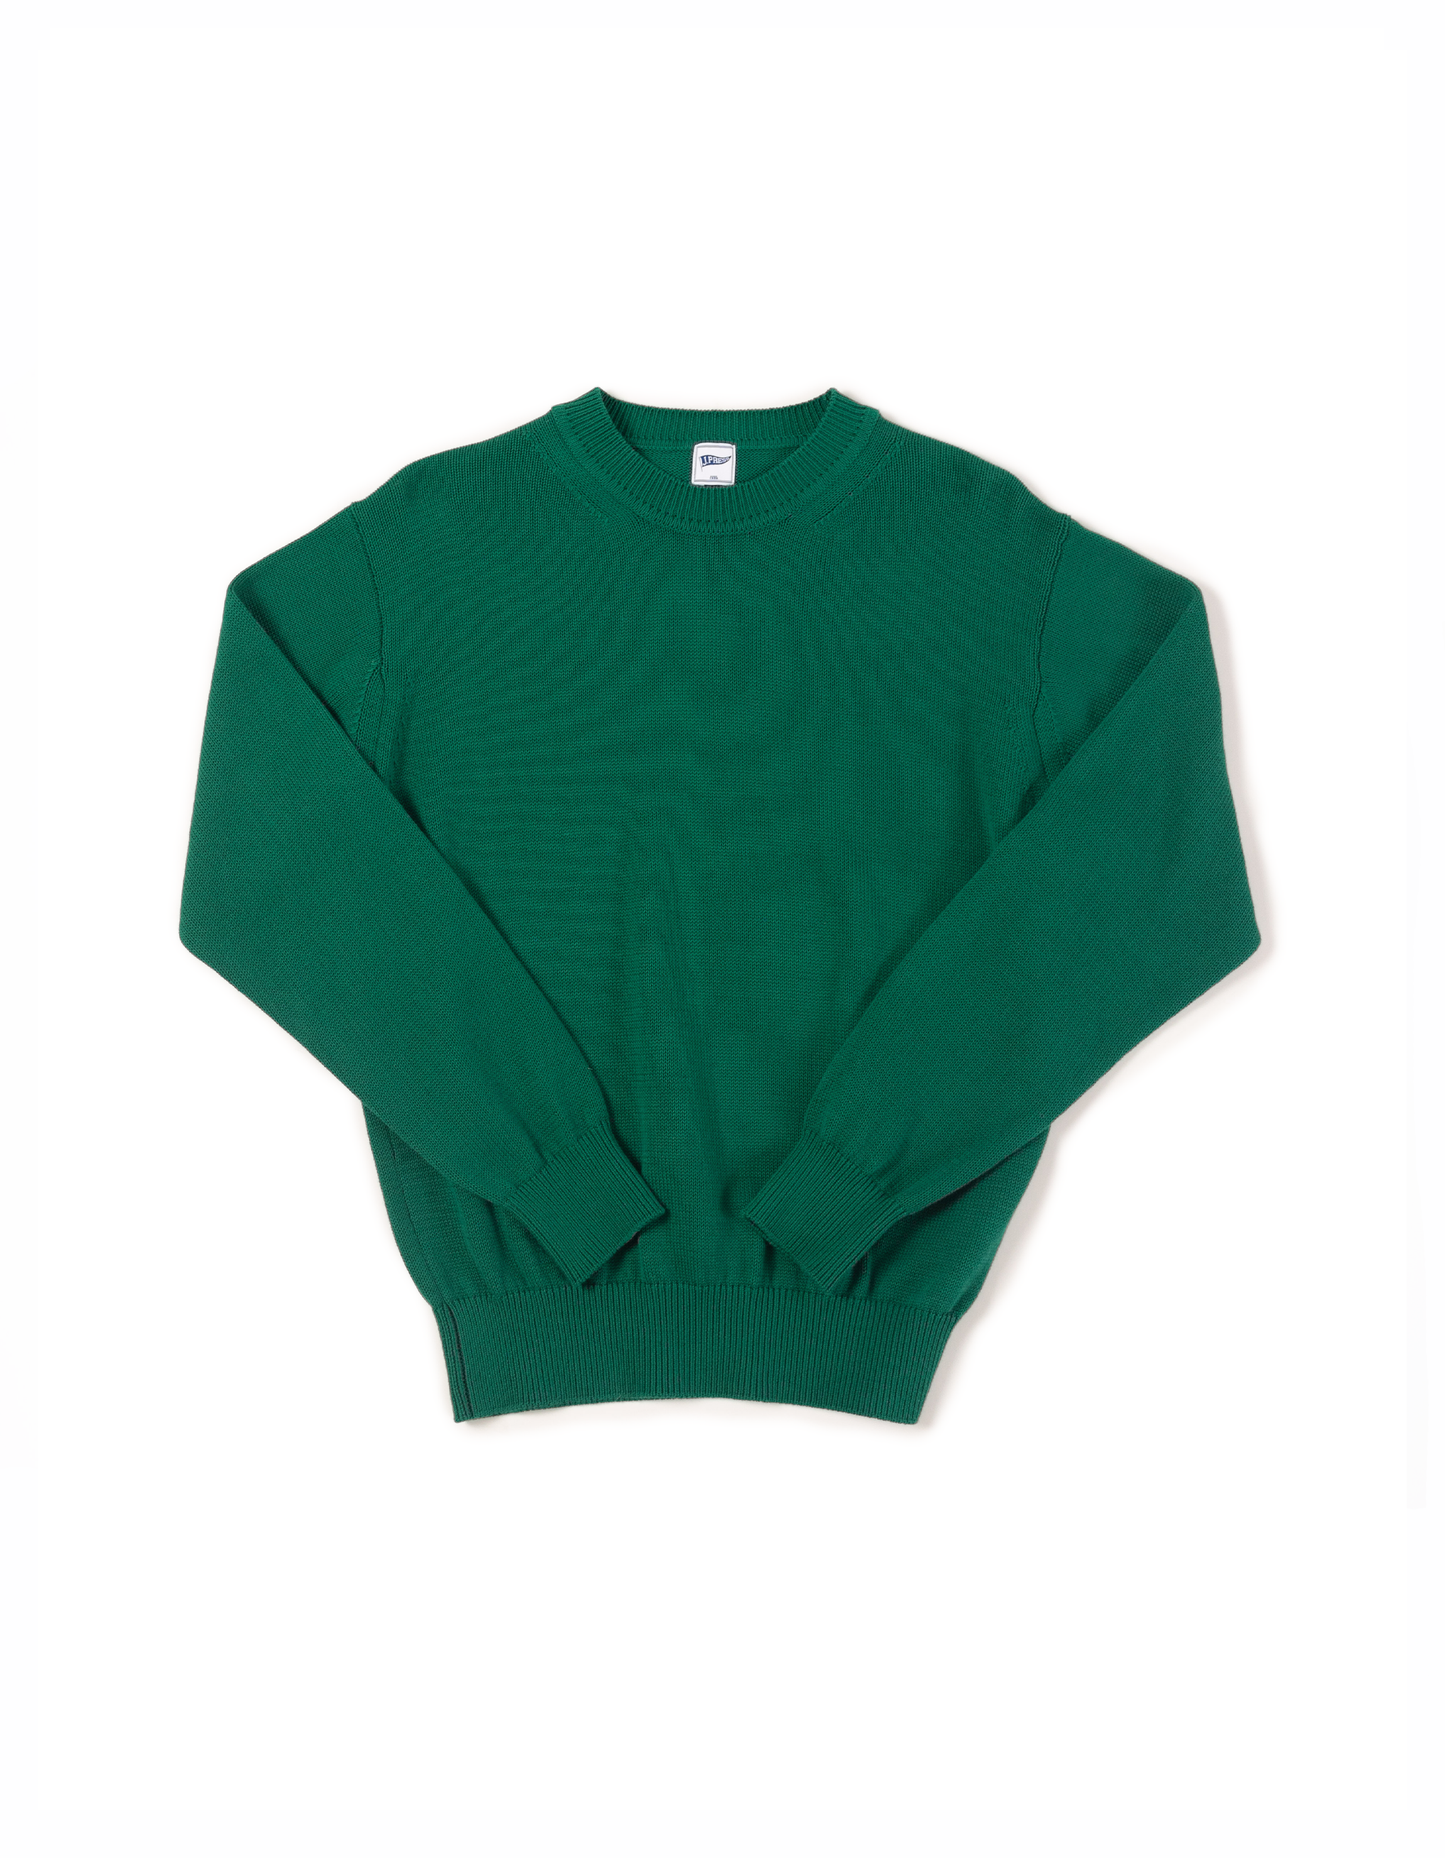 SOLID COTTON CREW NECK SWEATER - GREEN